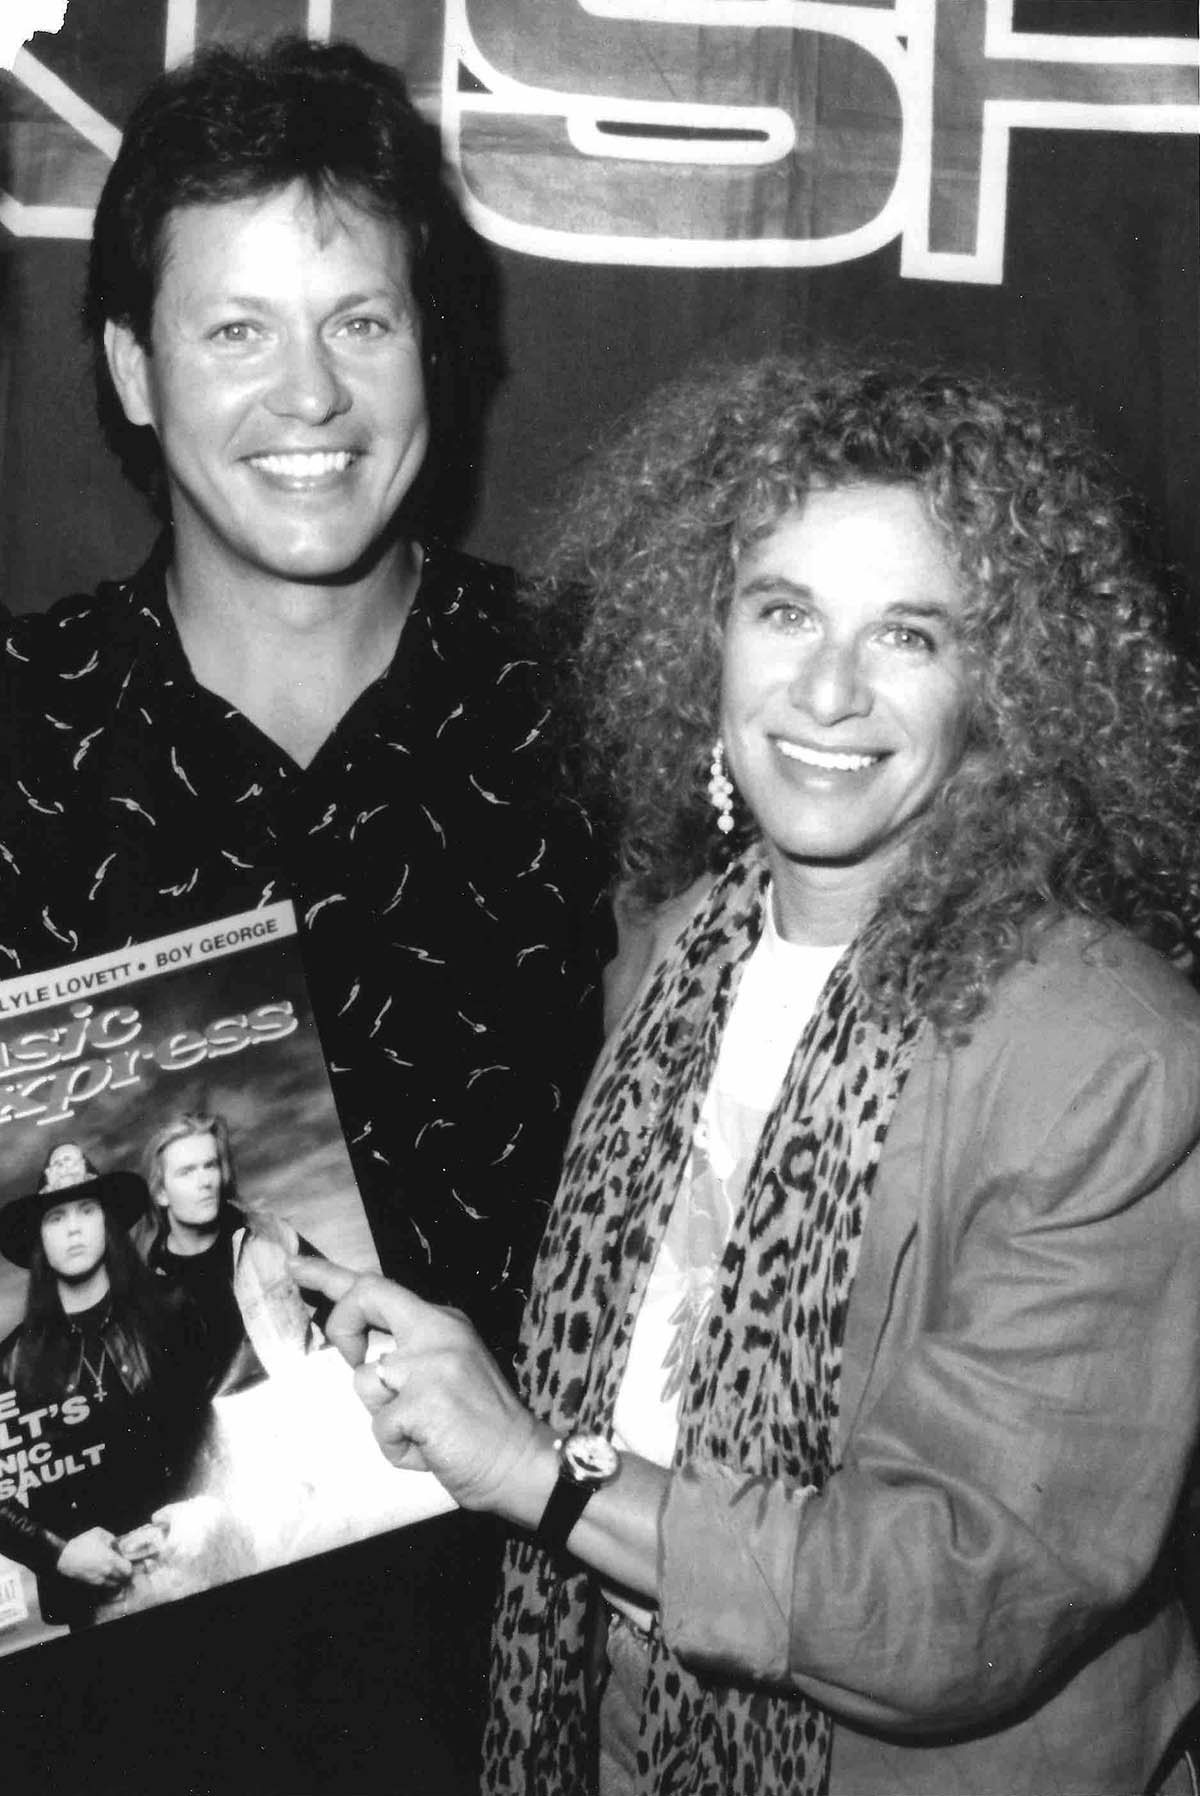 Carole King with Rick Dees Promo - Sam Goody Store Hollywood 